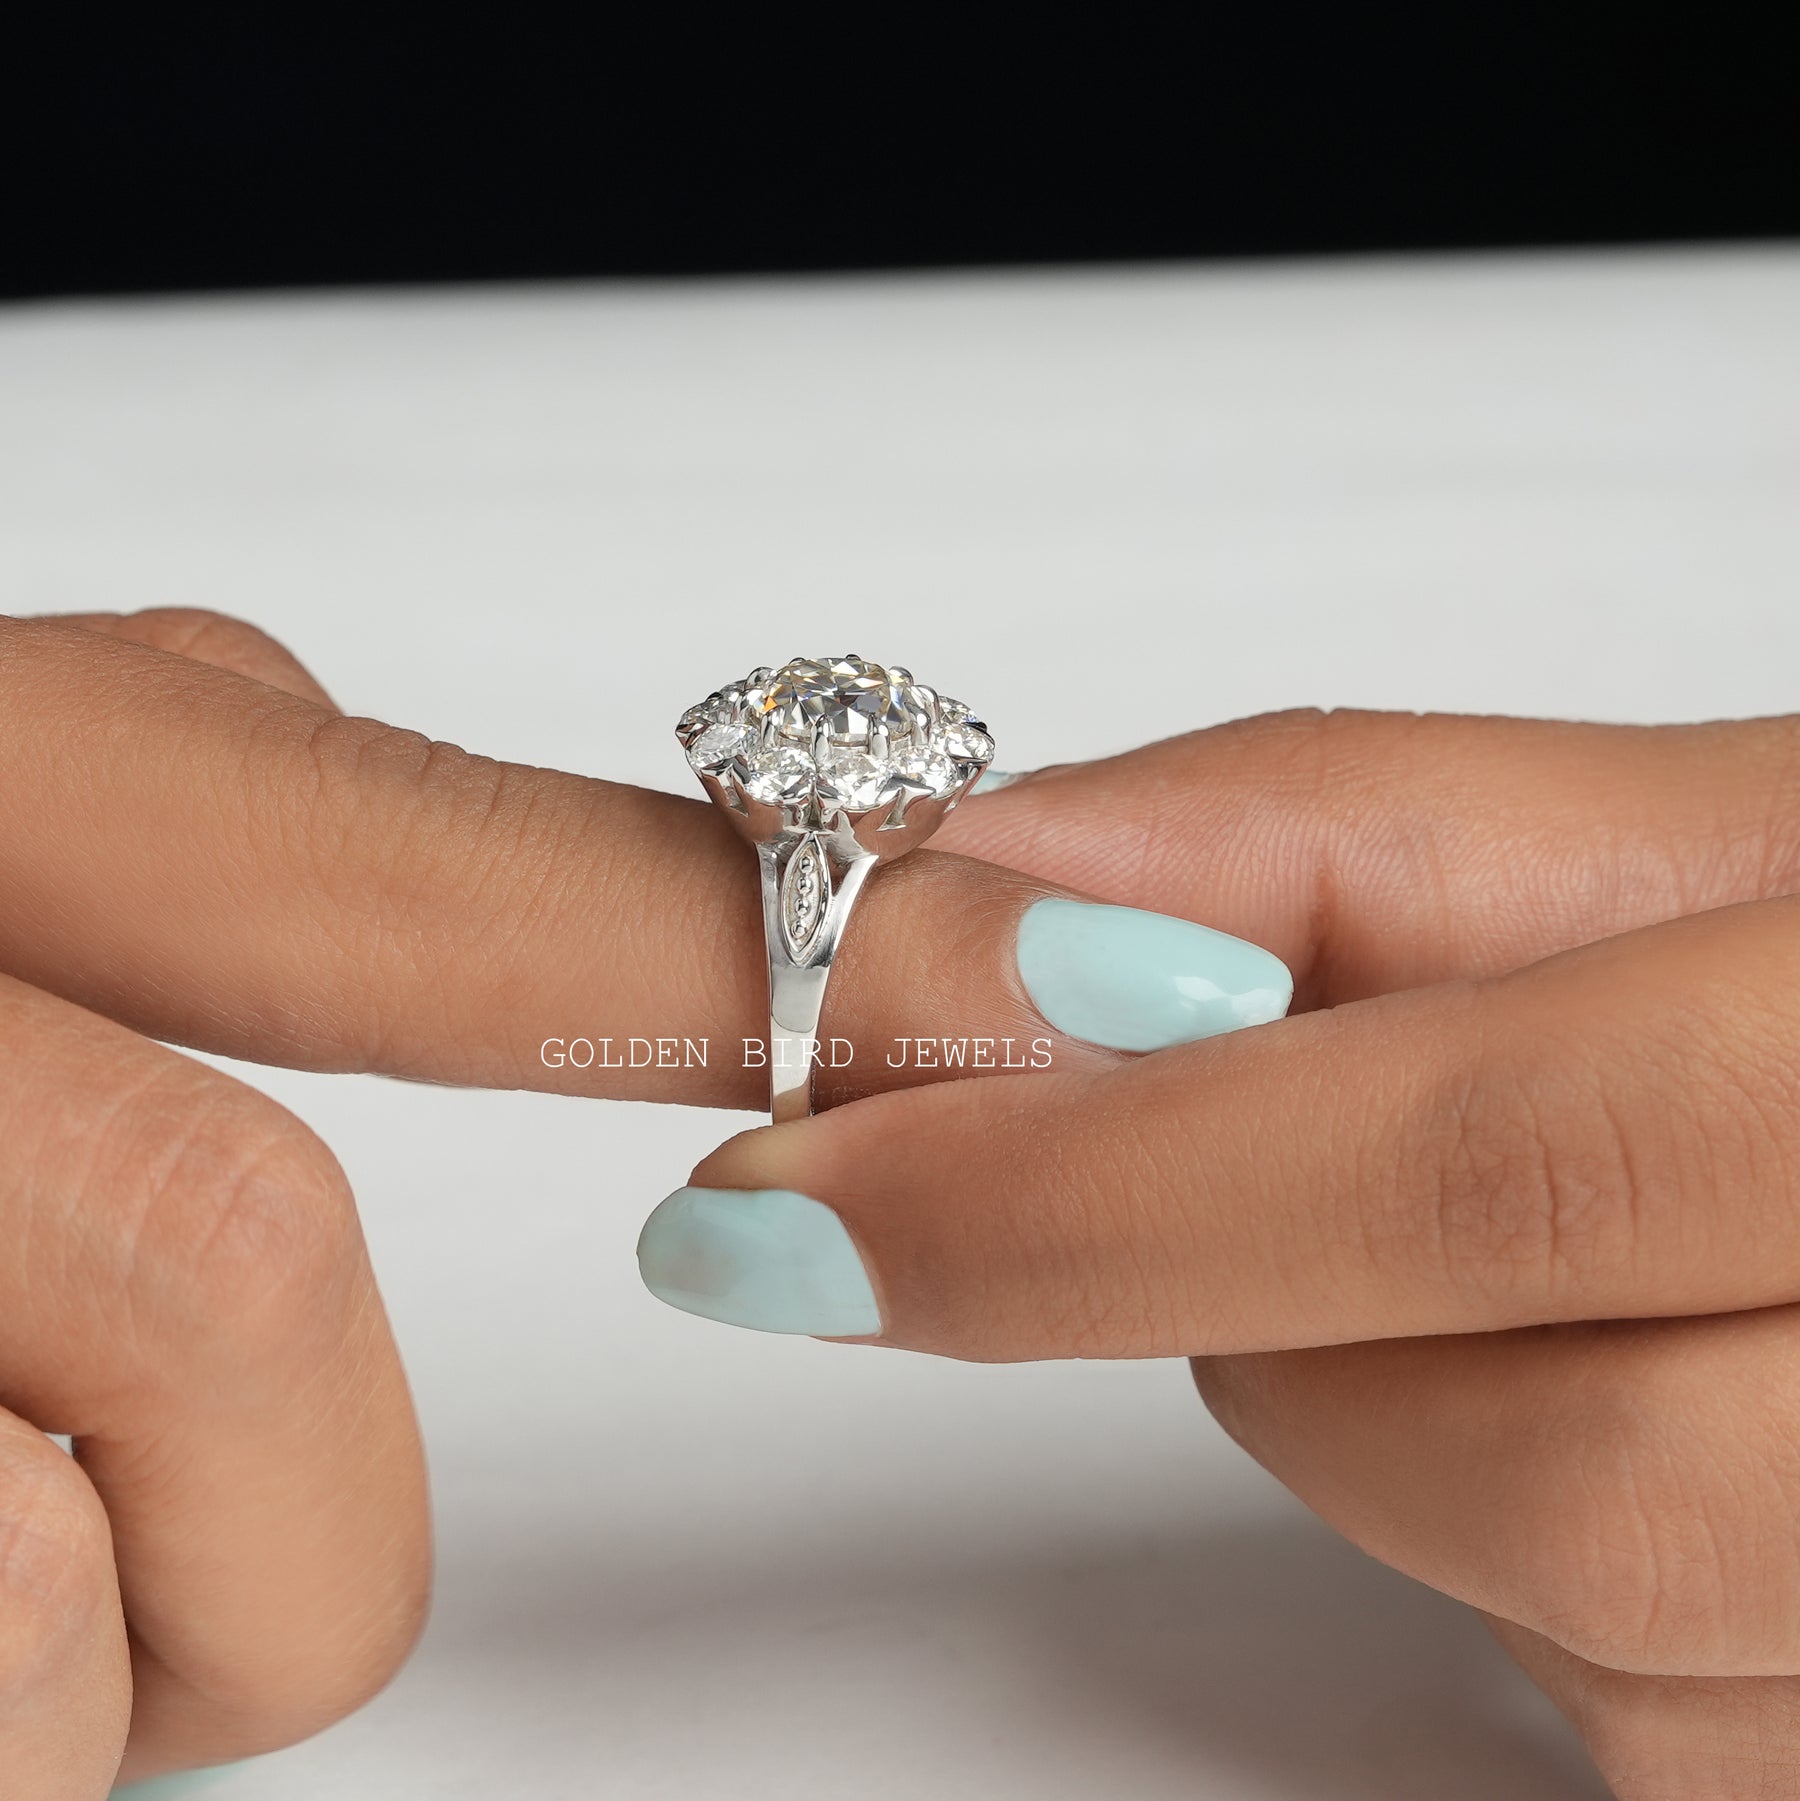 [A woman's hand holding a moissanite halo engagement ring]-[Golden Bird Jewels]